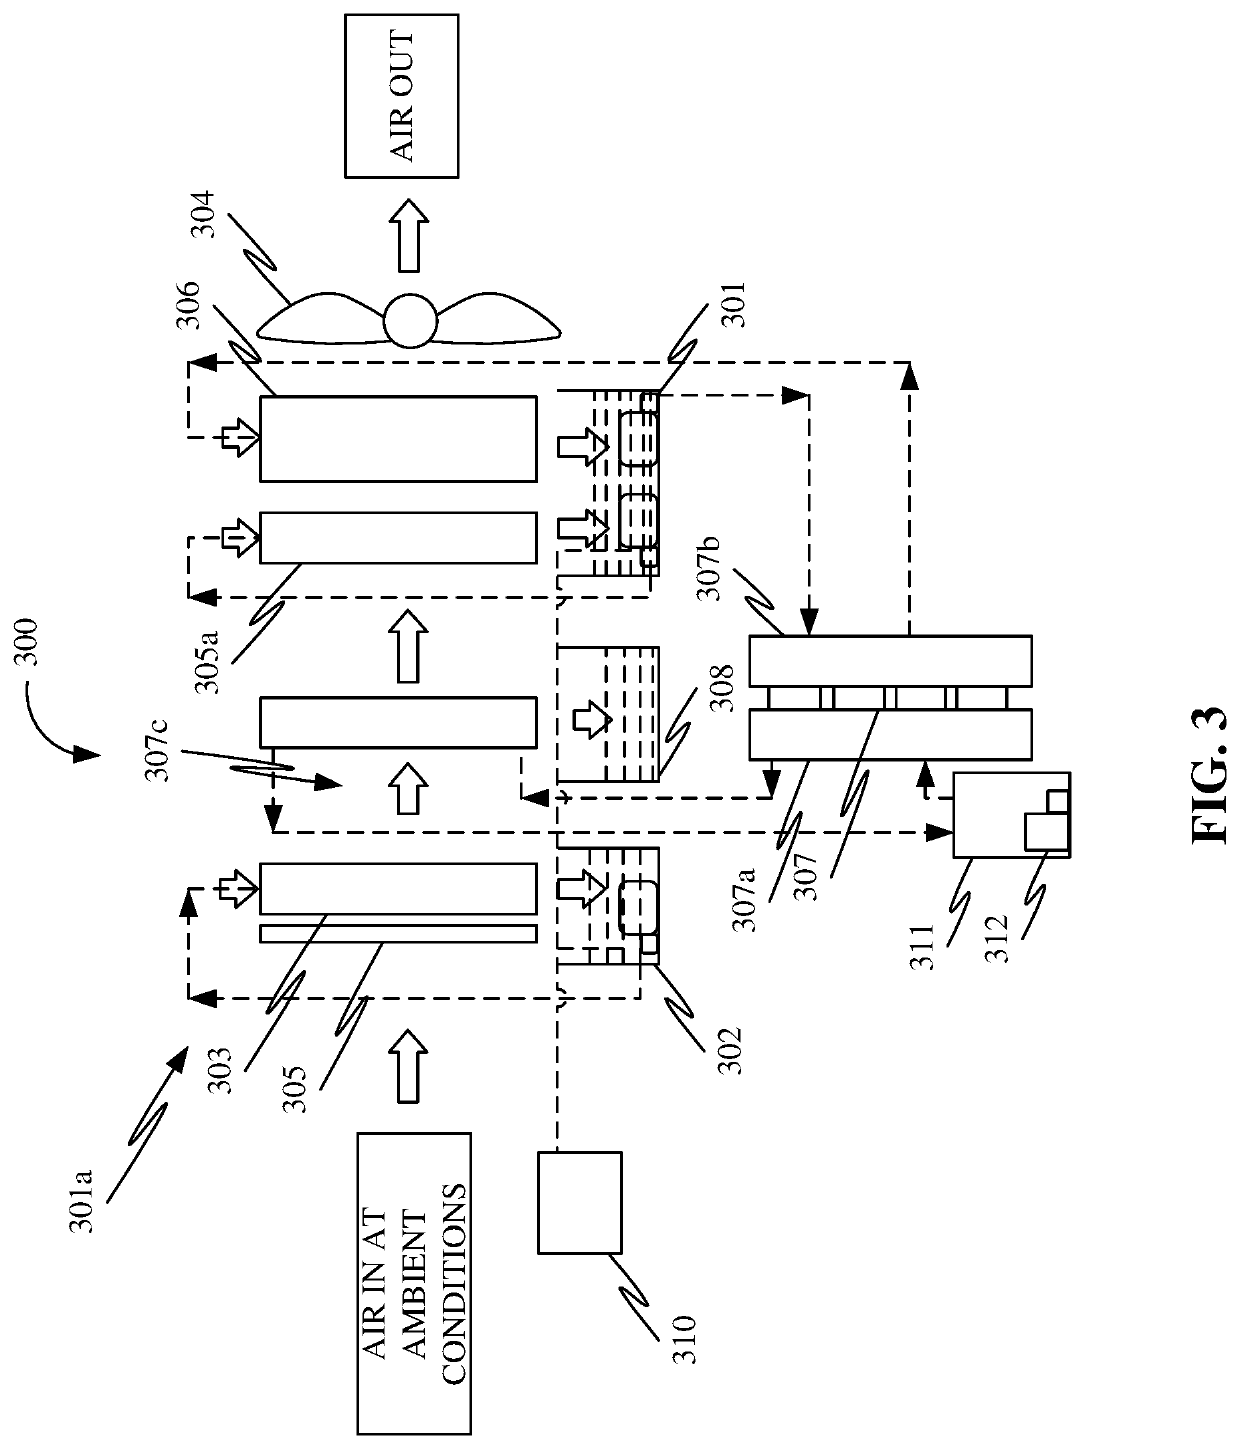 System and method of extracting water from atmospheric air